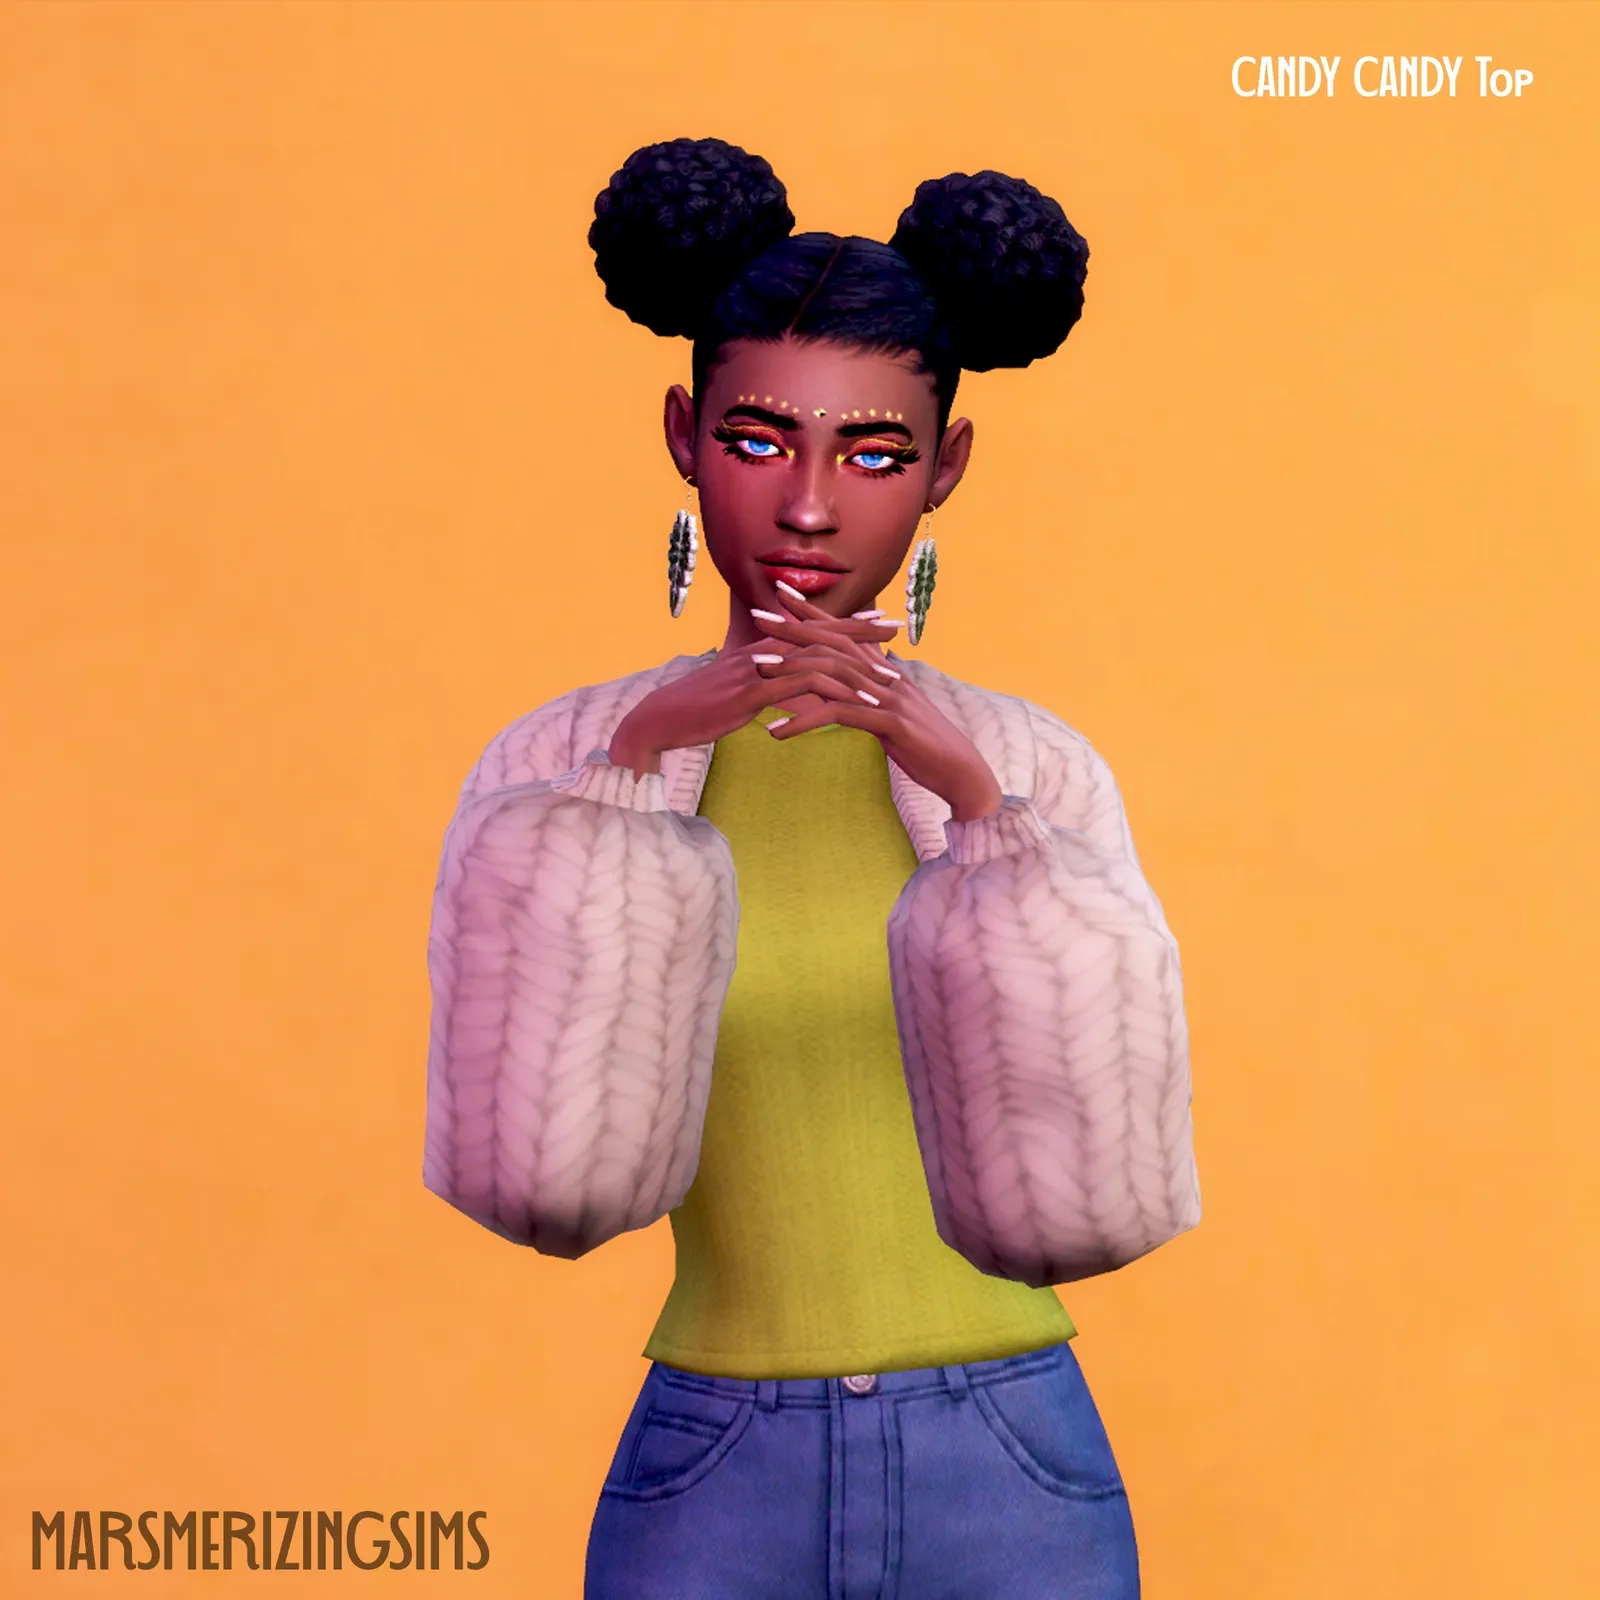 CANDY CANDY Top (PUBLIC DOWNLOAD)